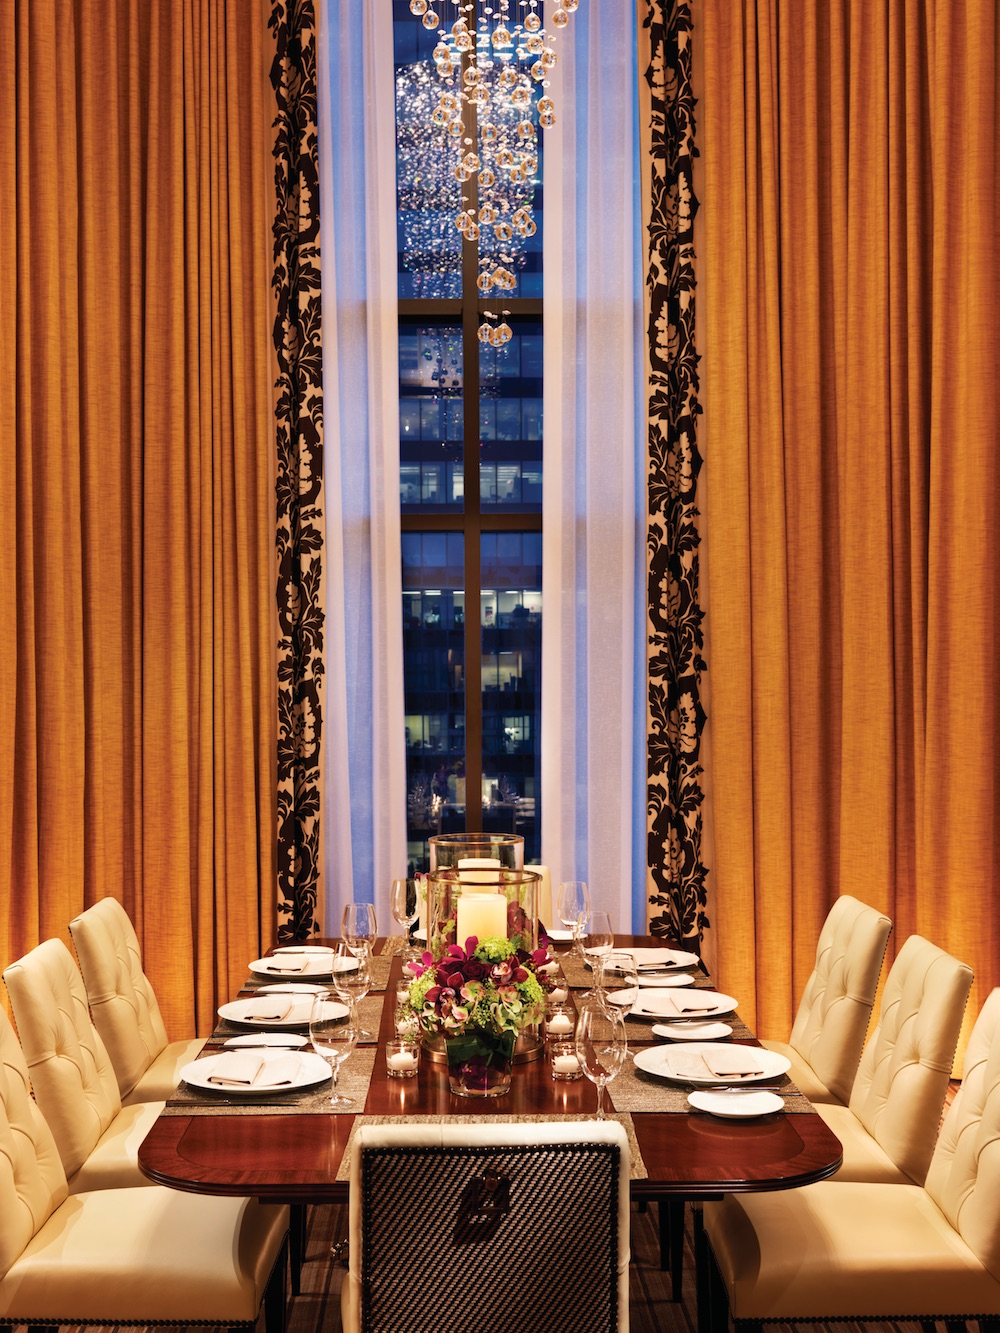 Dining Room of the Prime Minister Suite at the Four Seasons Vancouver